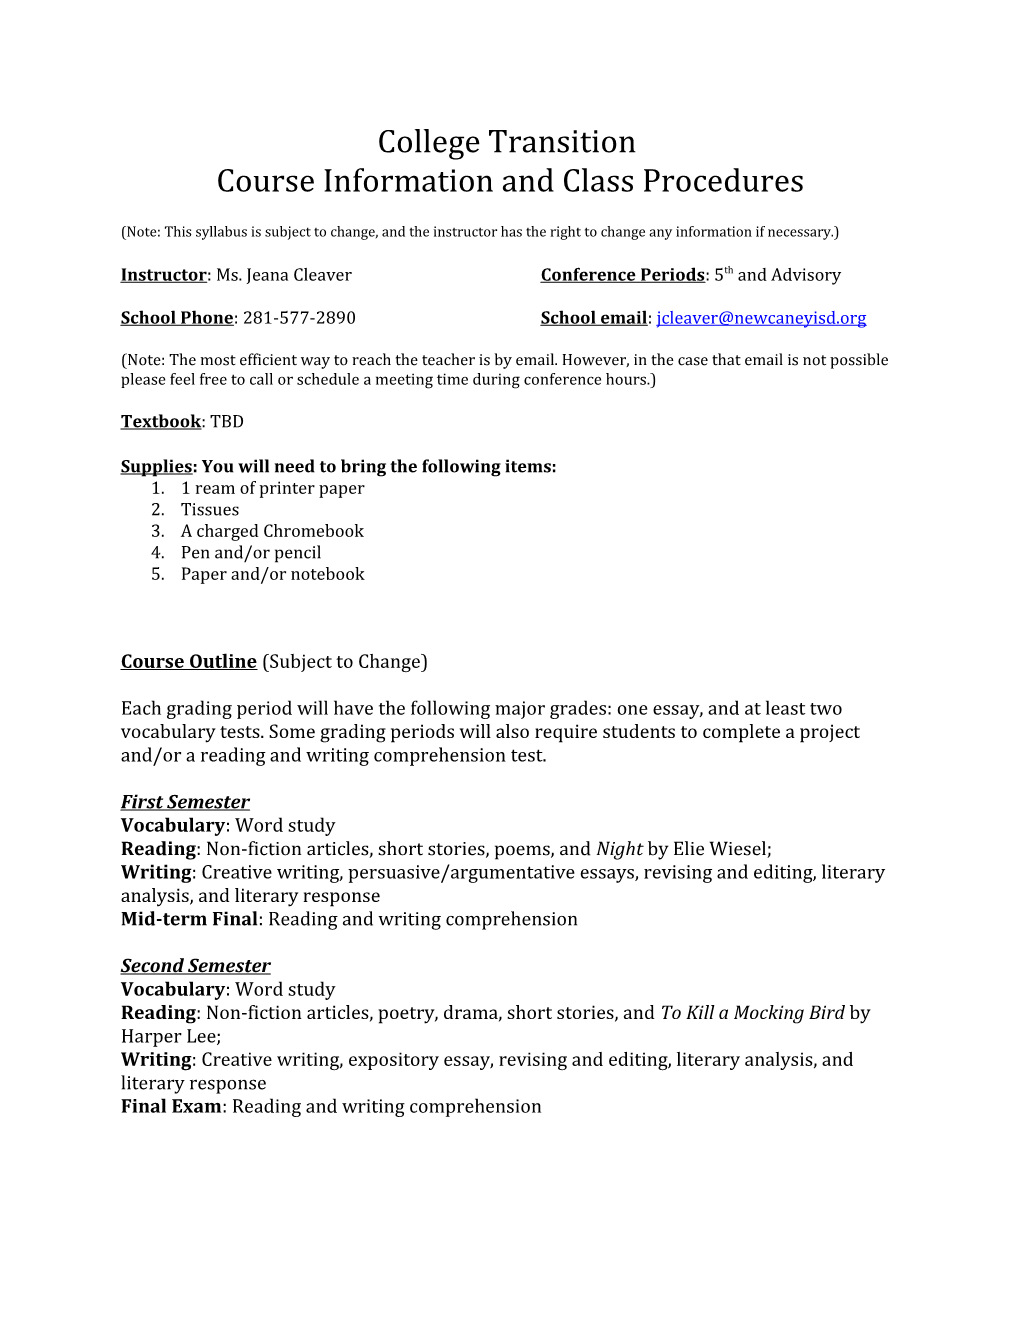 Course Information and Class Procedures